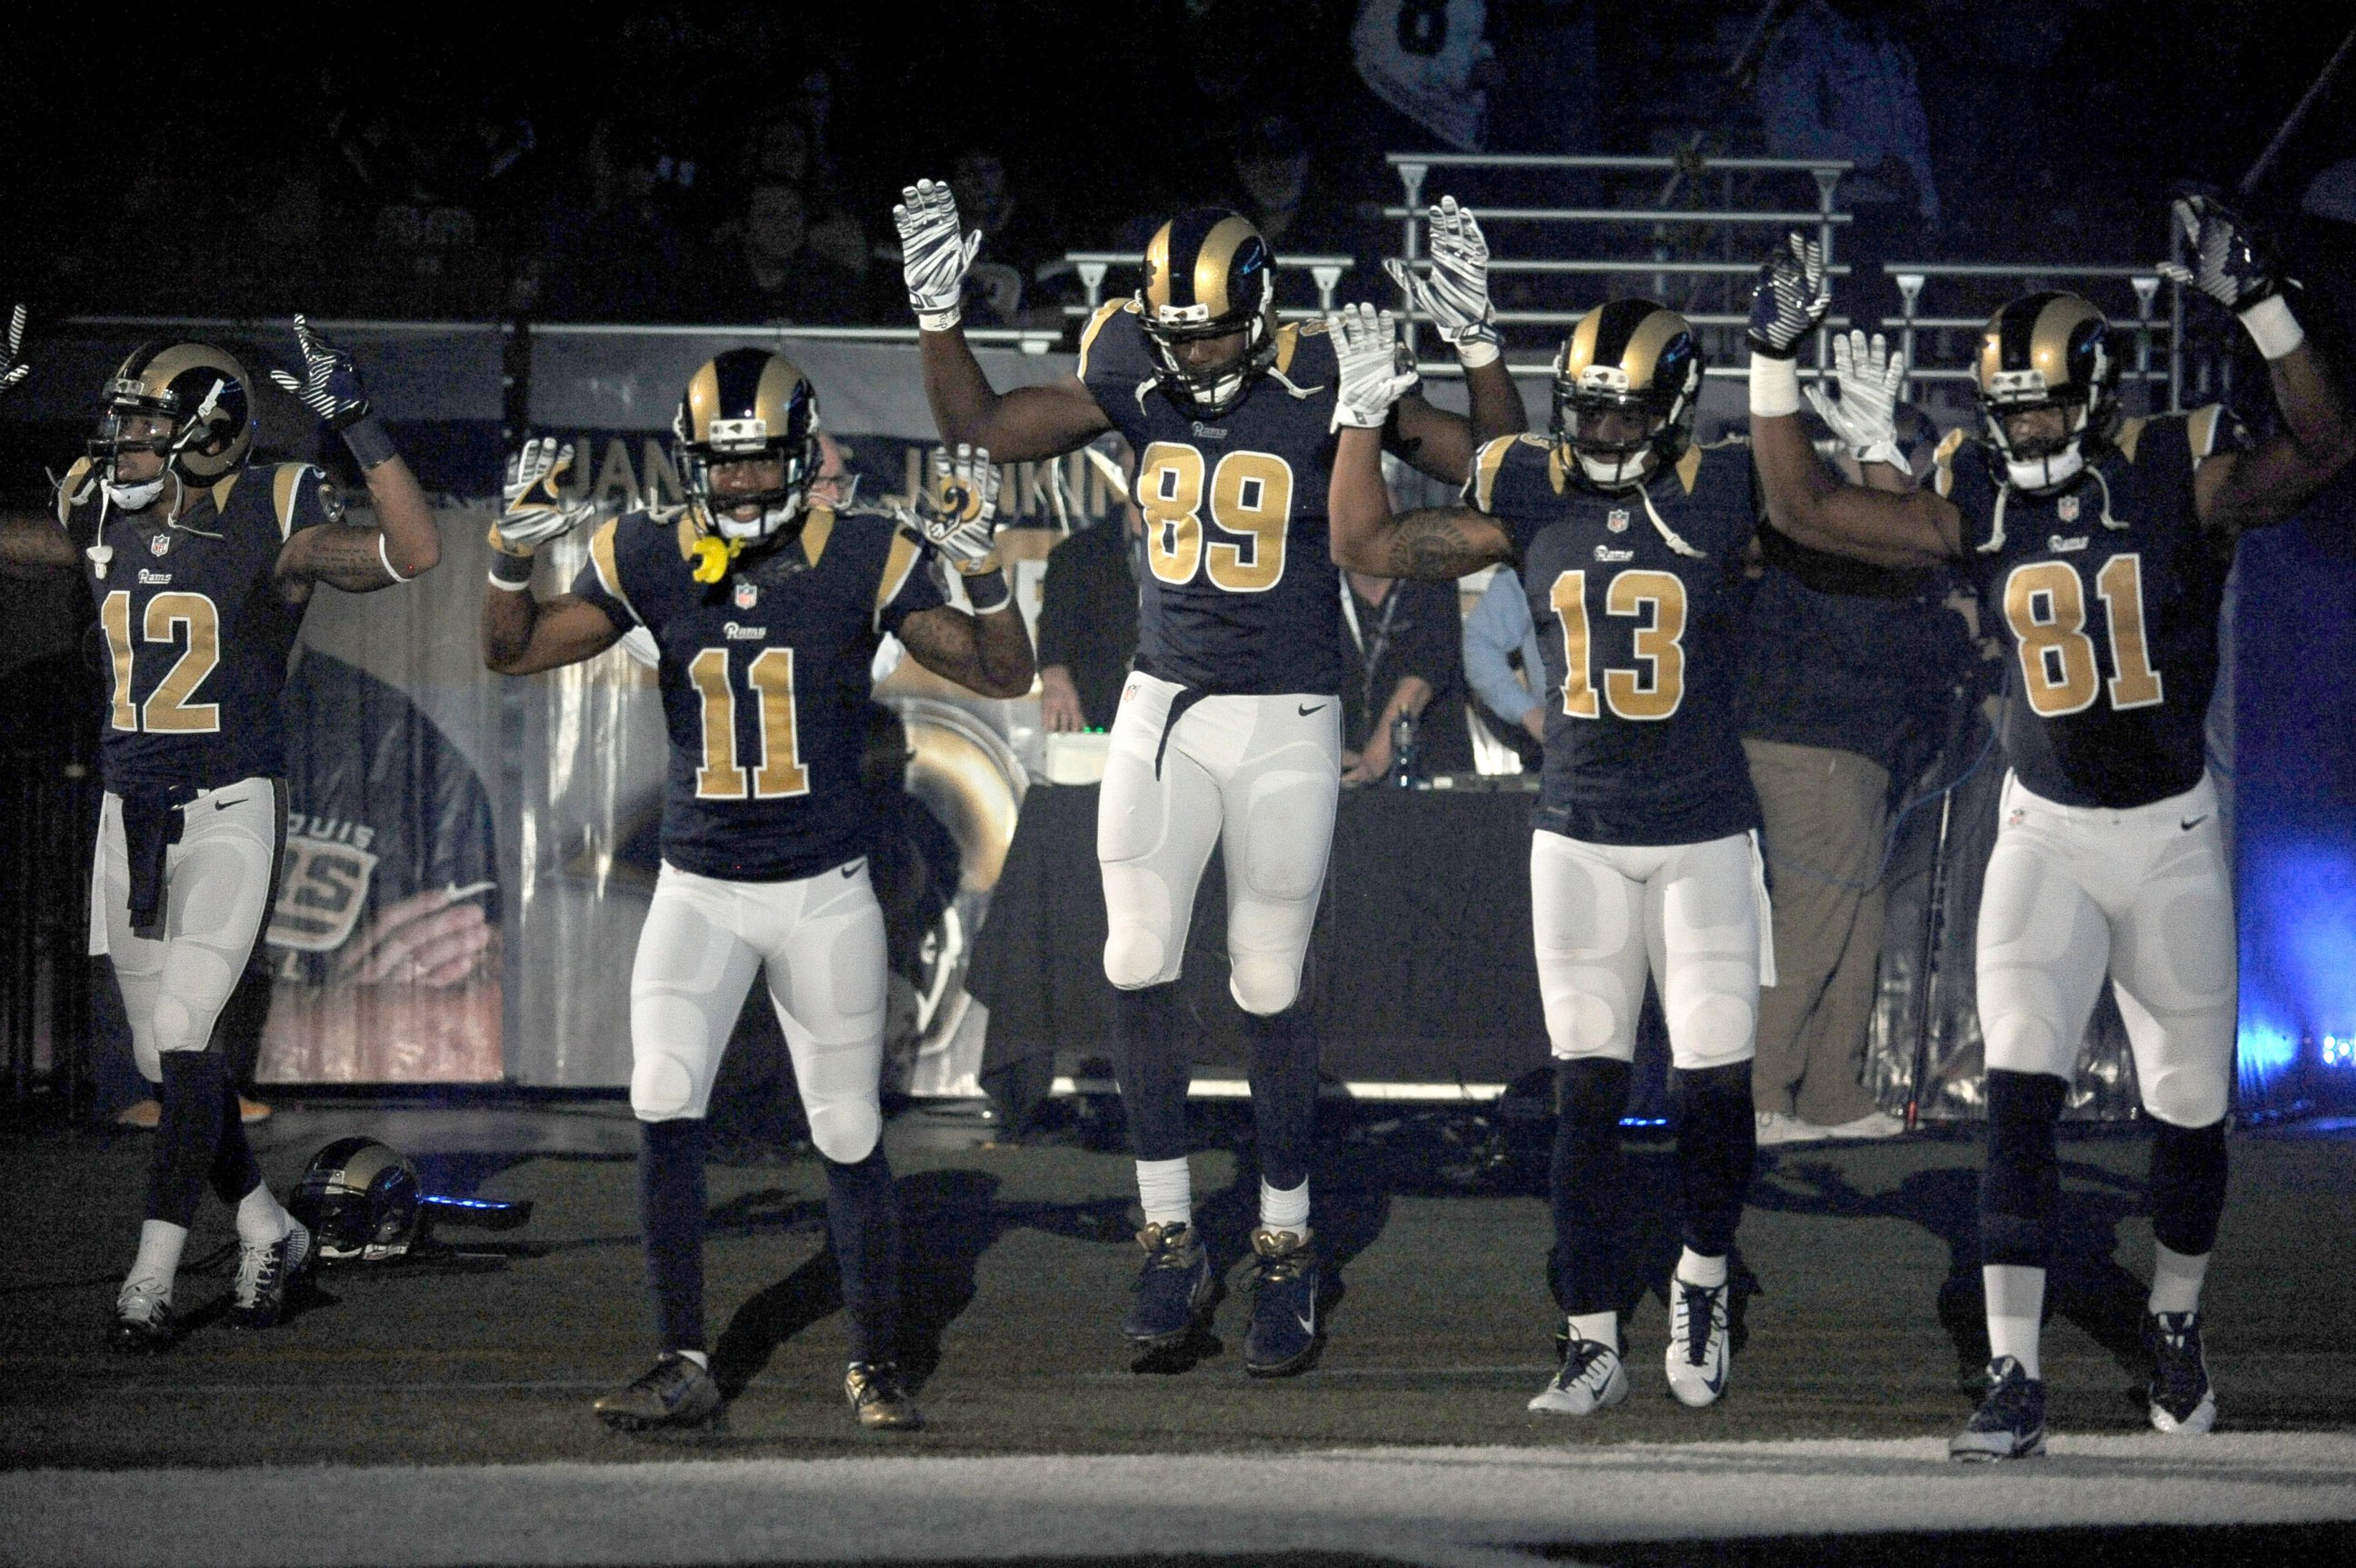 PHOTO: In this Sunday Nov. 30, 2014, file photo, St. Louis Rams players raise their arms in awareness of the events in Ferguson, Mo., as they walk onto the field during introductions before an NFL football game against the Oakland Raiders in St. Louis. 